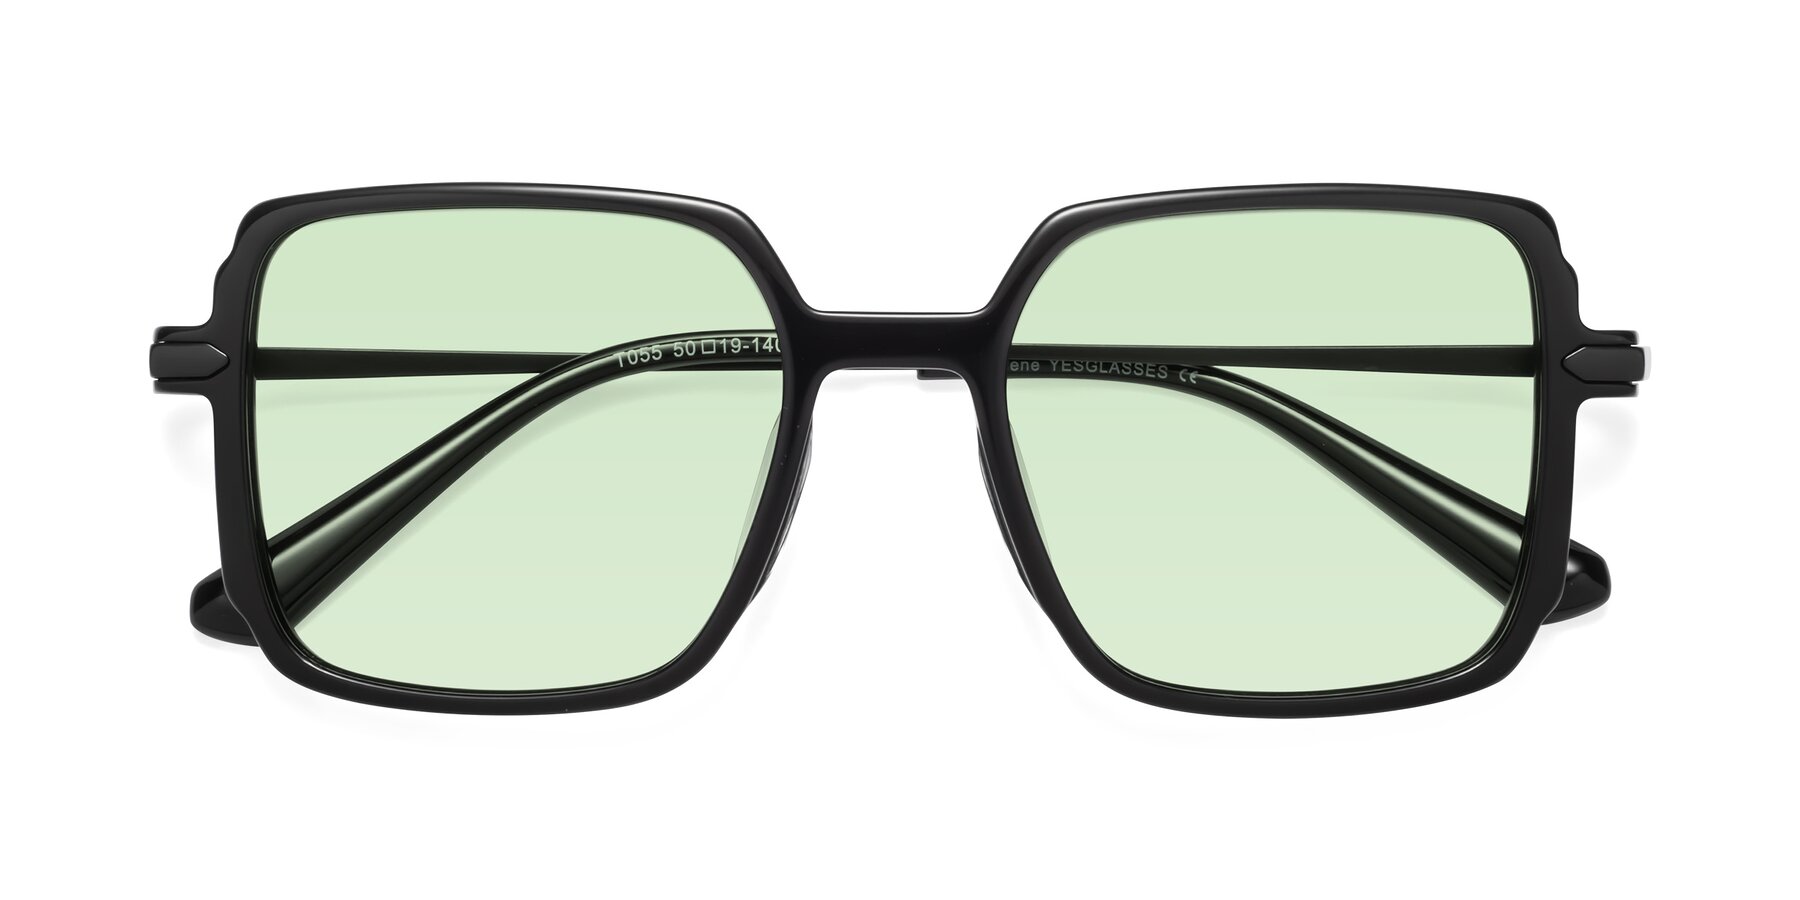 Square Glasses - Black and Colored Frames